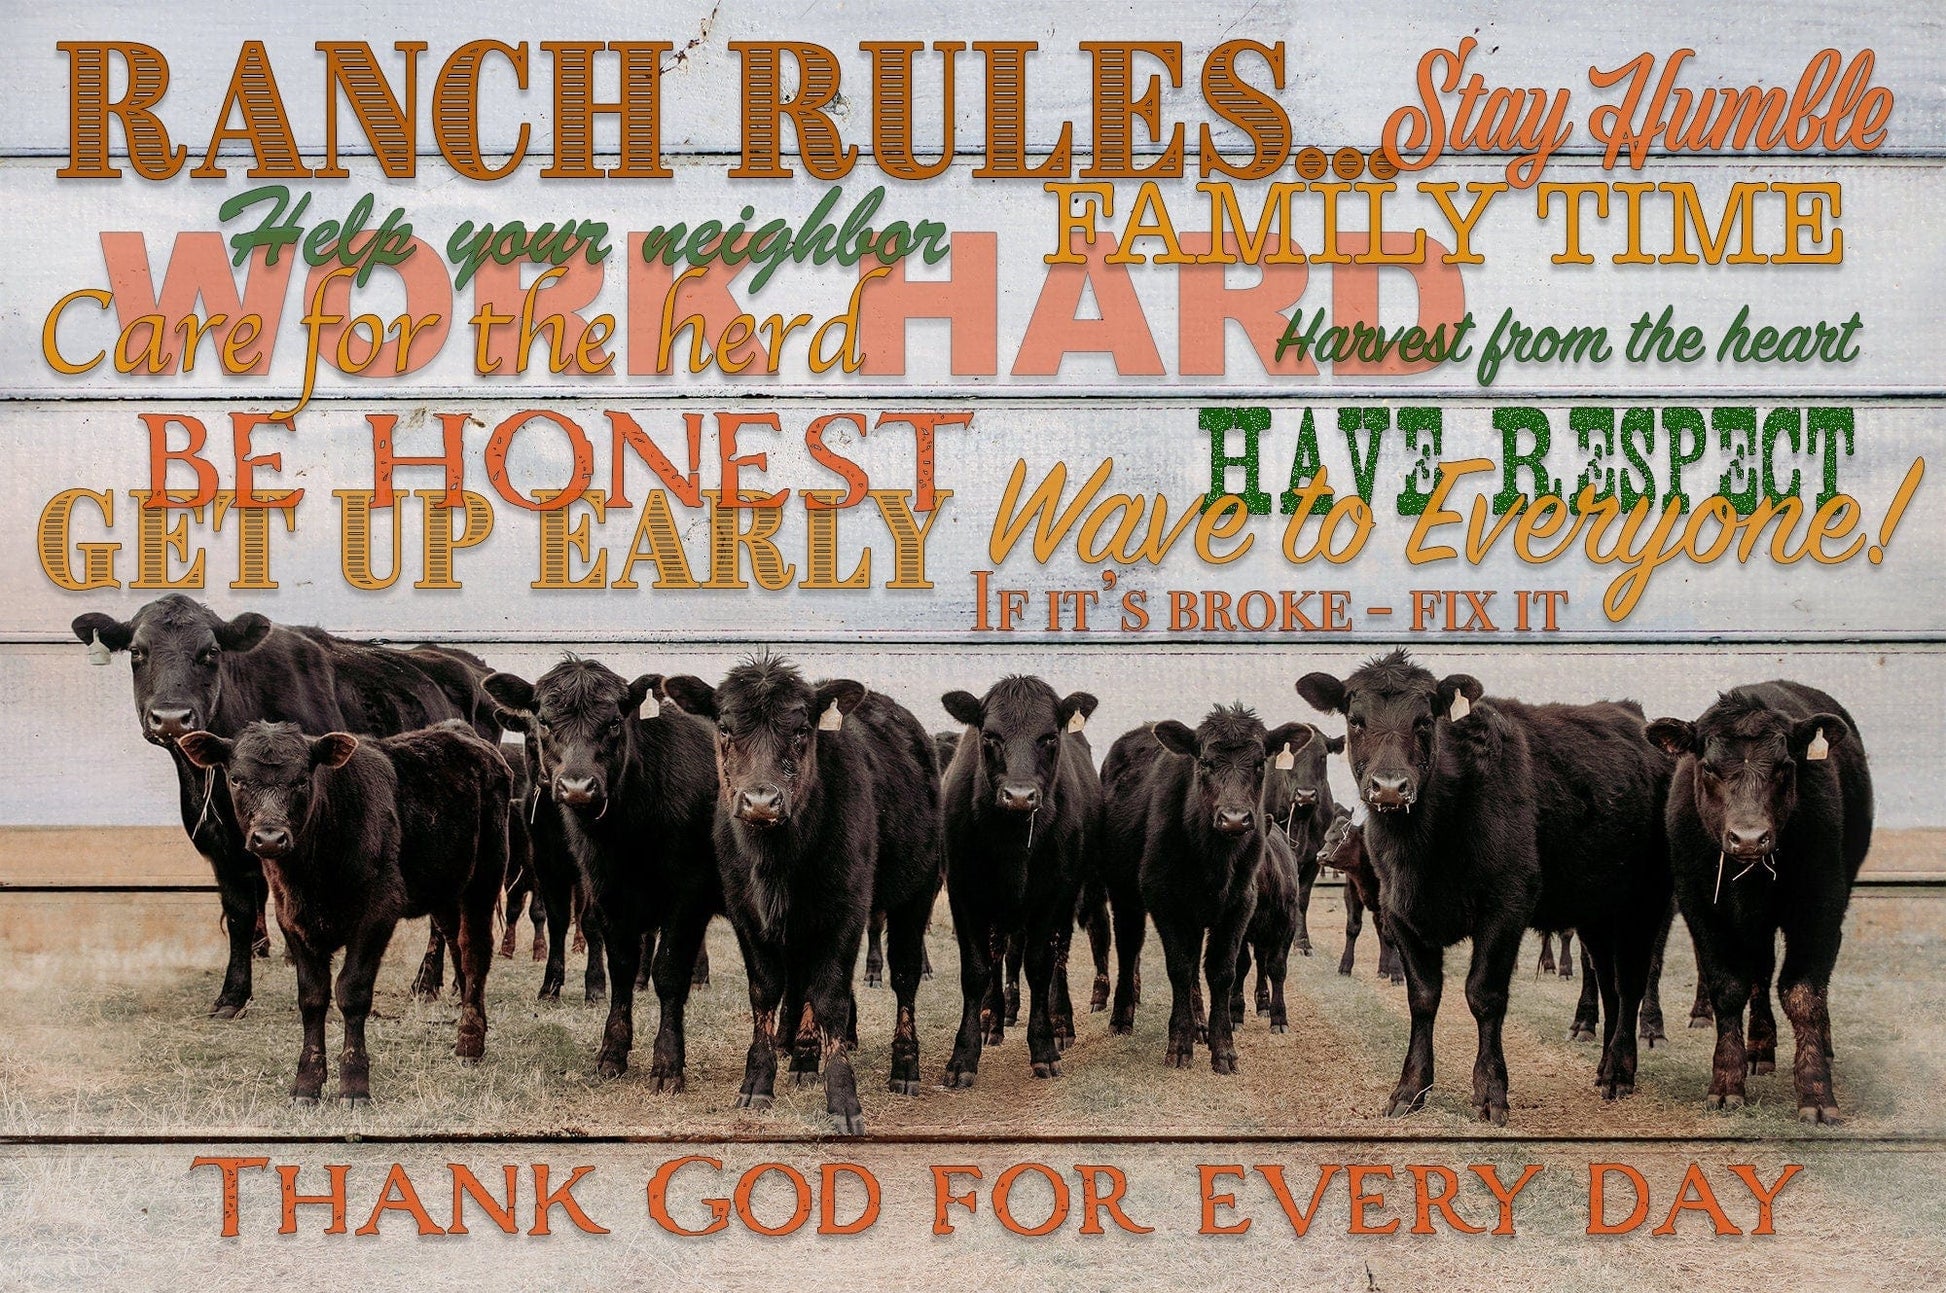 Teri James Photography Wall Art Paper Photo Print / 12 x 18 Inches Ranch Rules Inspirational Quotes about Farming and Ranching - Black Angus